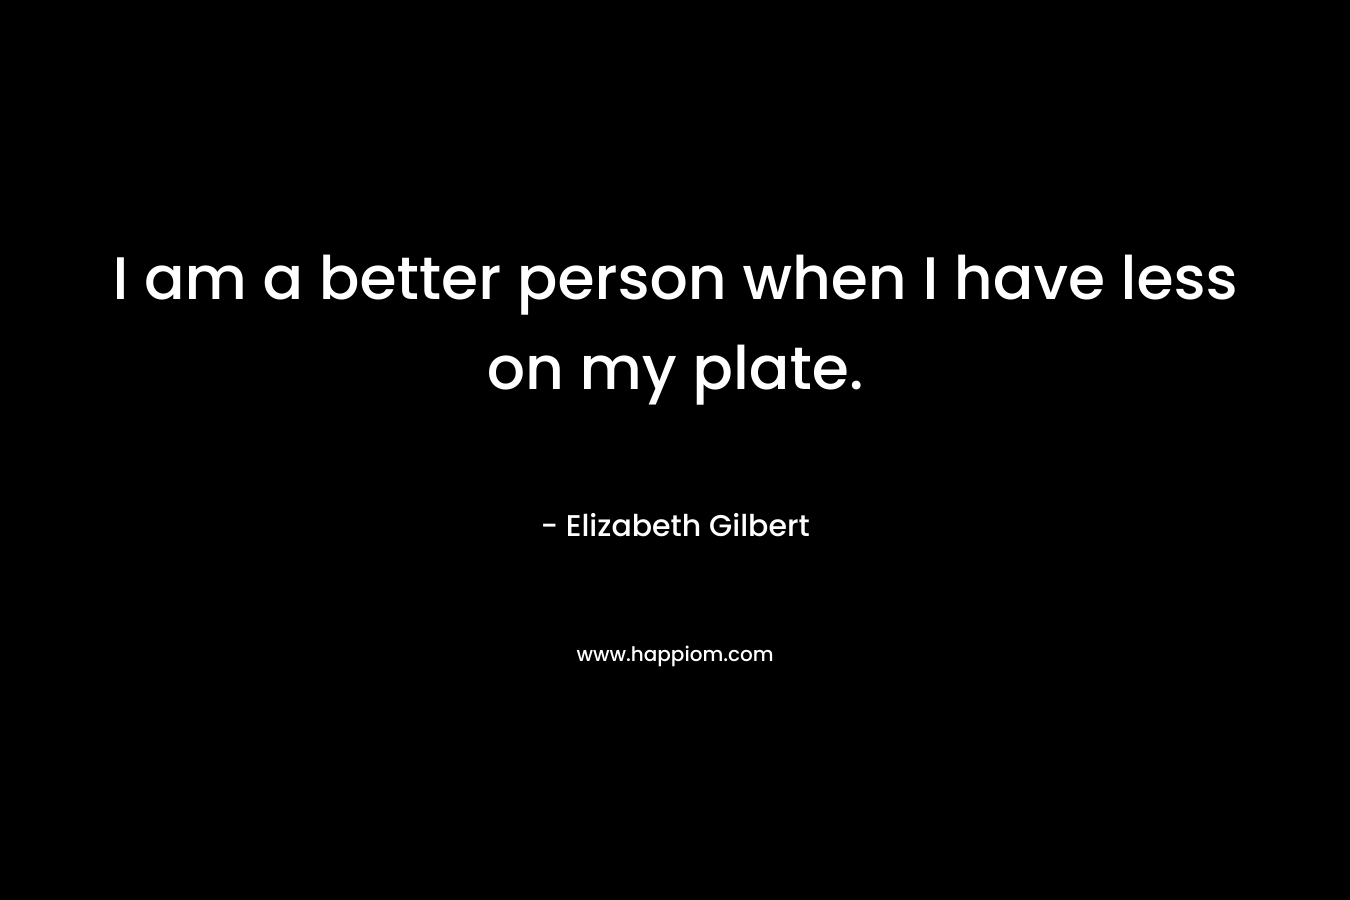 I am a better person when I have less on my plate.